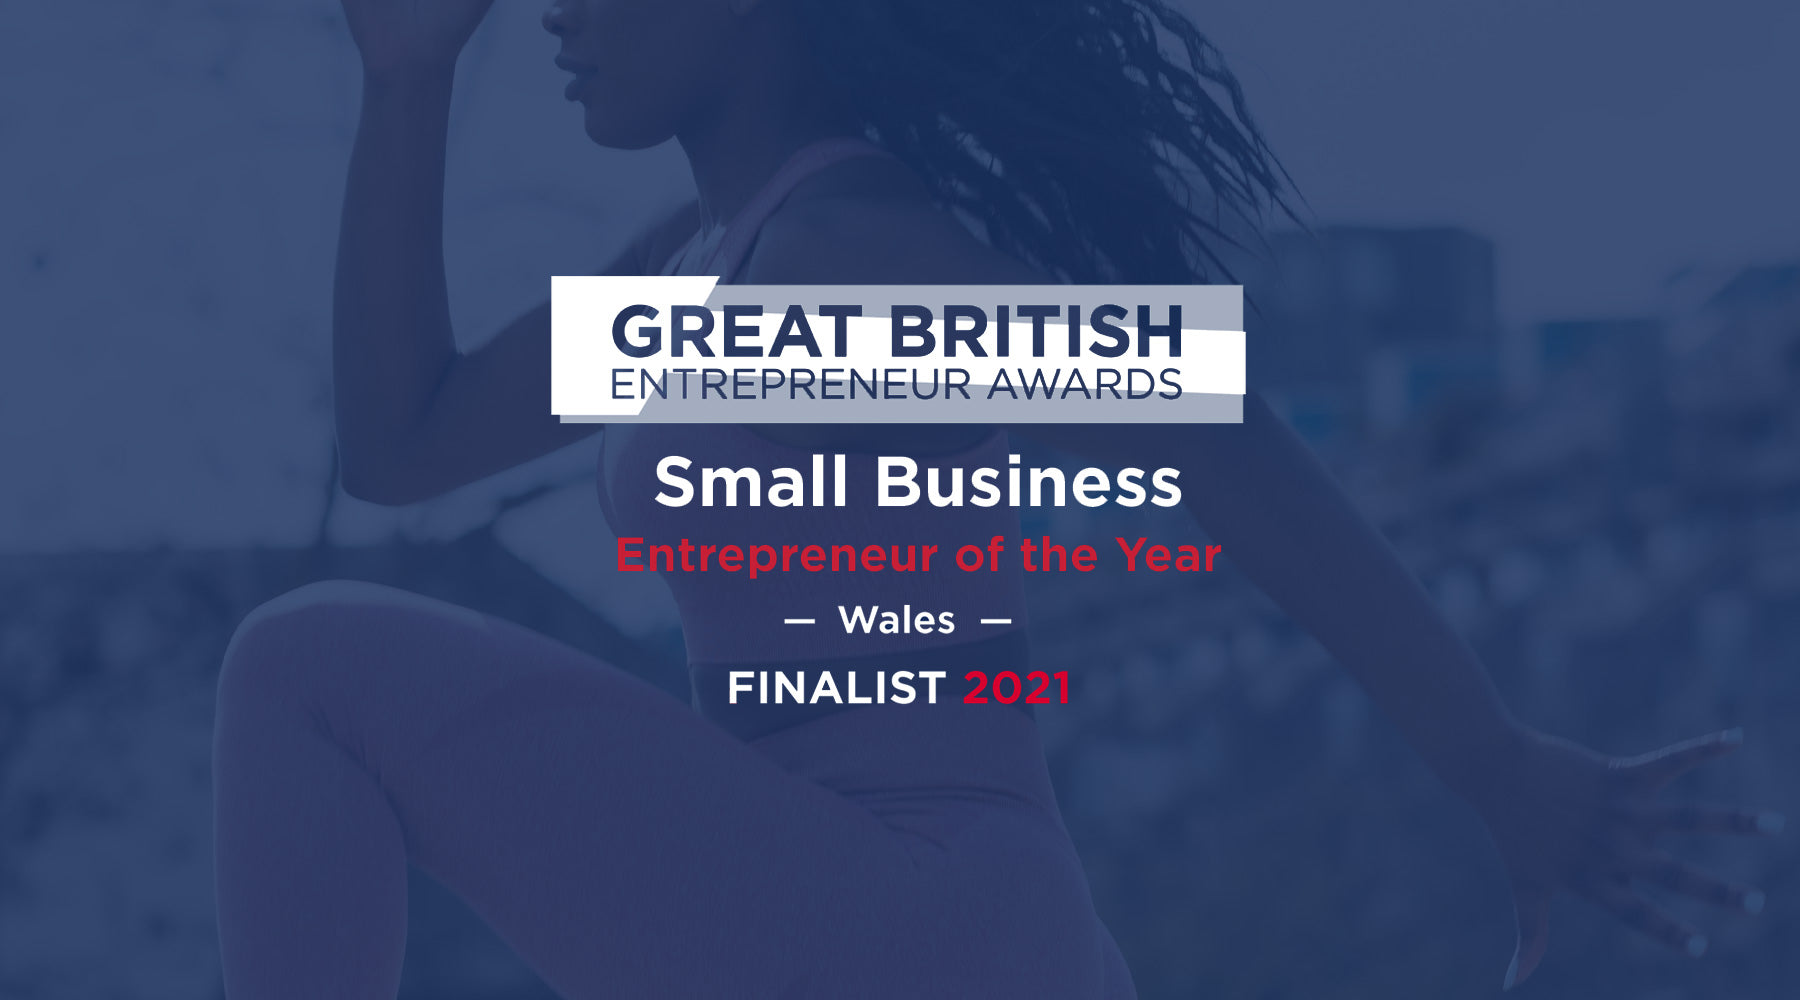 Great British Entrepreneur Awards - Small Business Entrepreneur of the Year Finalist